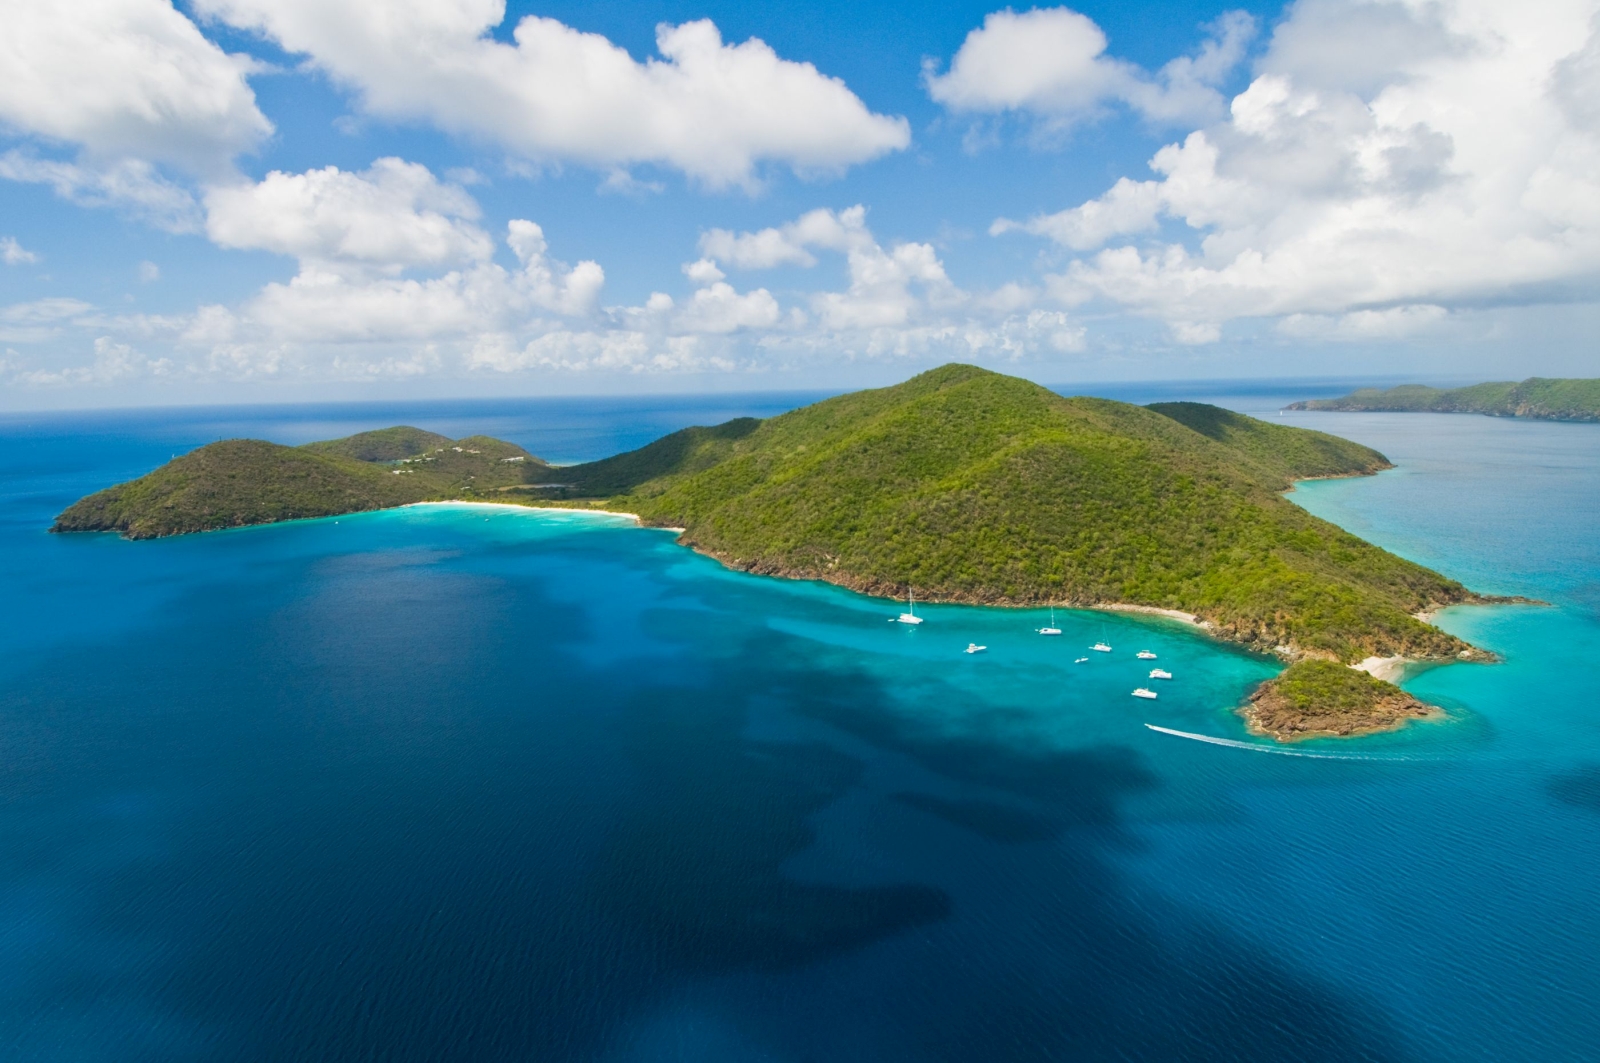 Aerial view of Guana Island